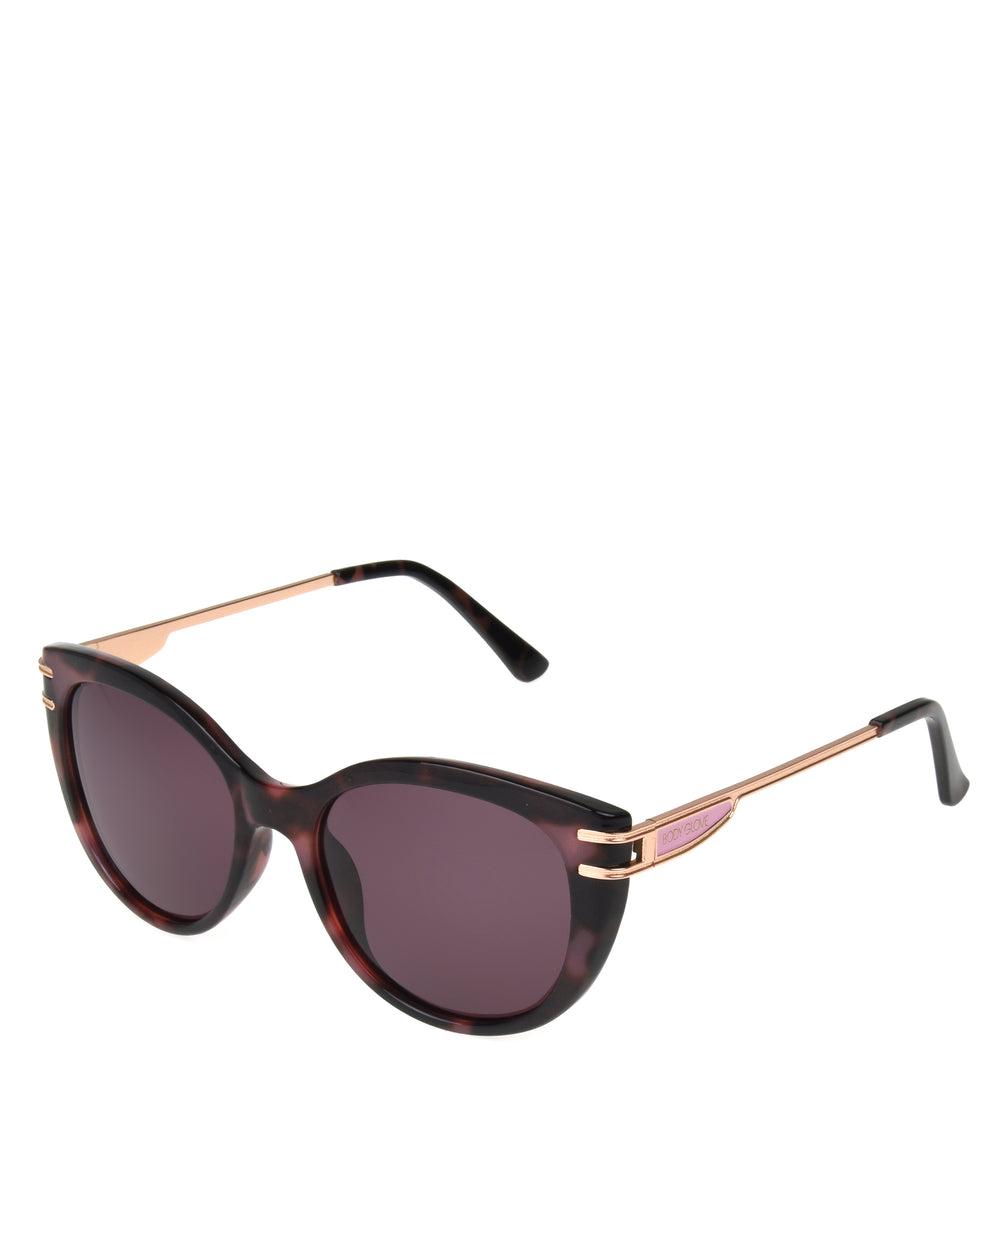 Women's BGL 2001 Shiny Pink Demi Sunglasses with Rose Gold - Pink